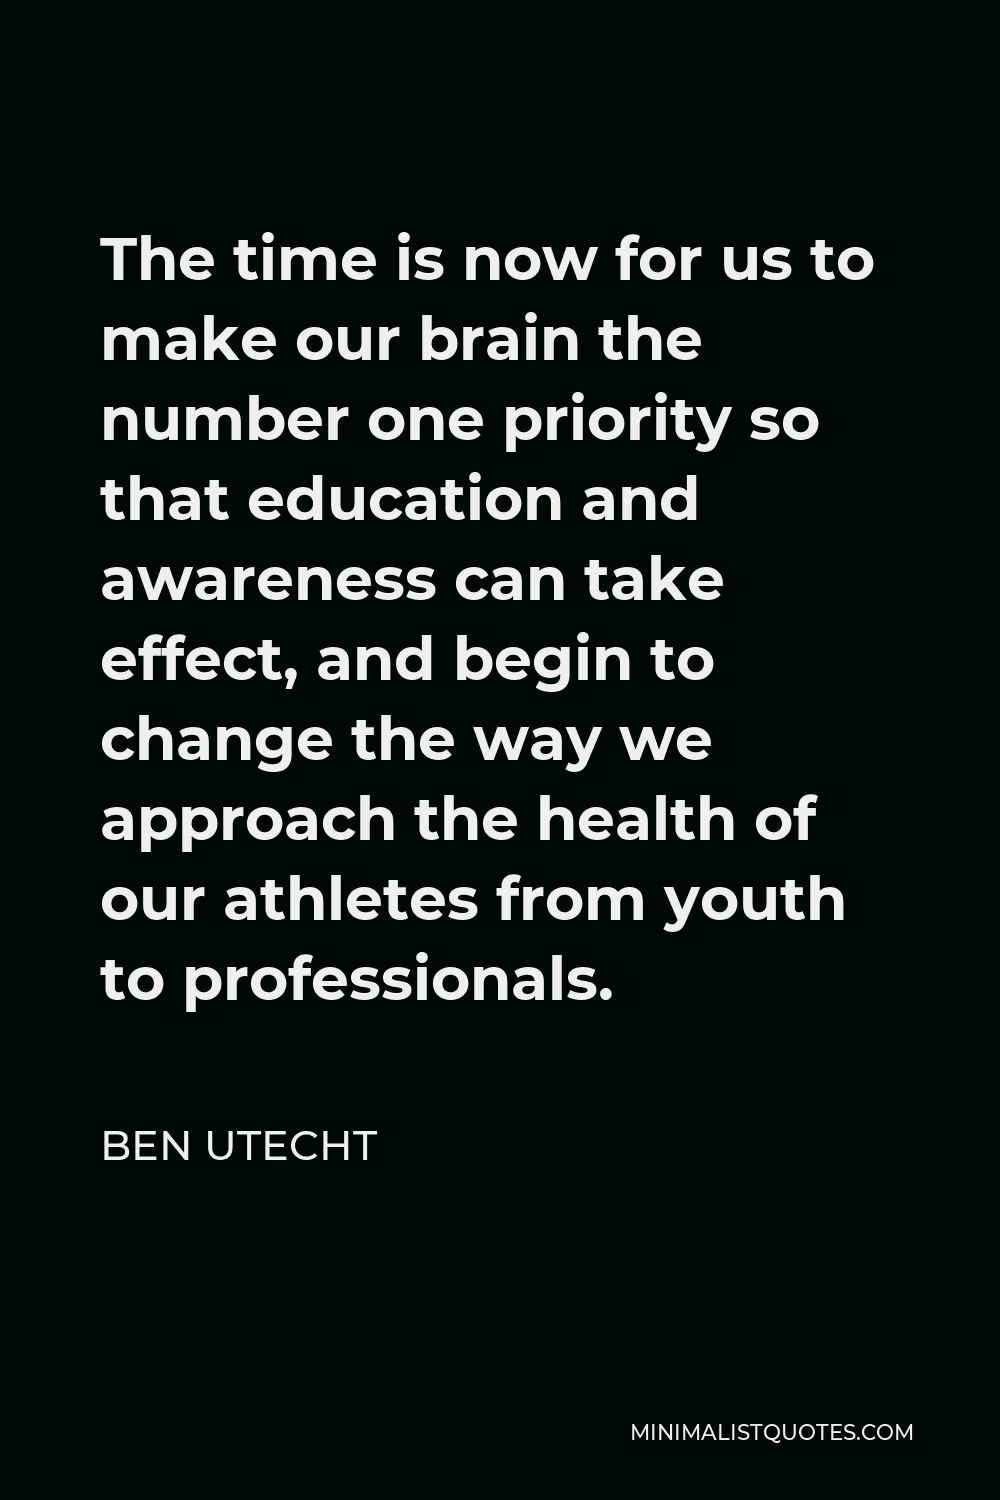 Ben Utecht Quote - The time is now for us to make our brain the number one priority so that education and awareness can take effect, and begin to change the way we approach the health of our athletes from youth to professionals.